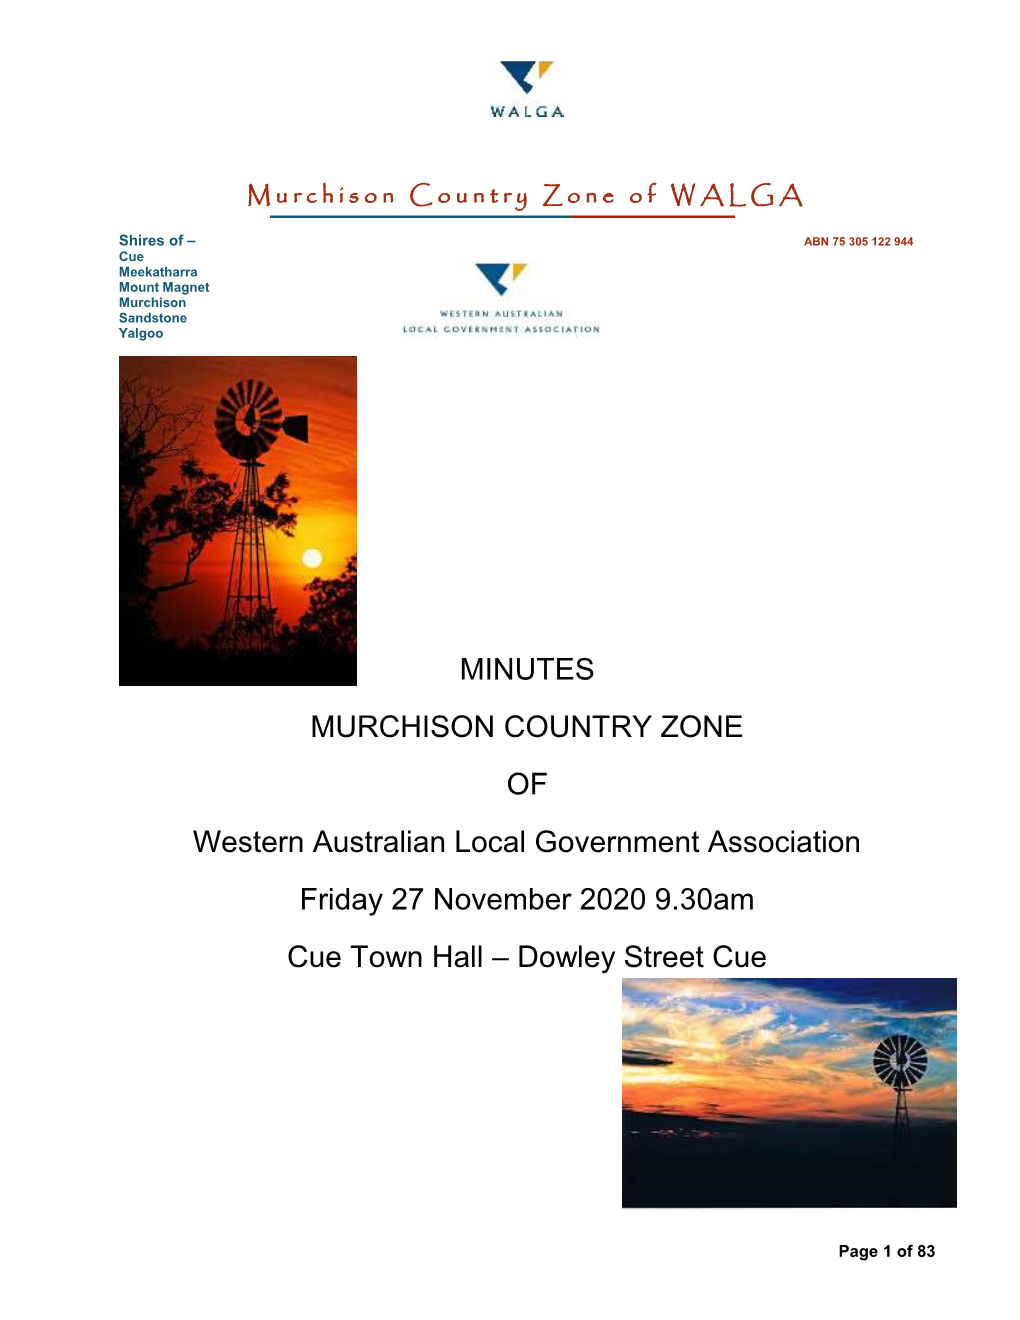 MINUTES MURCHISON COUNTRY ZONE of Western Australian Local Government Association Friday 27 November 2020 9.30Am Cue Town Hall